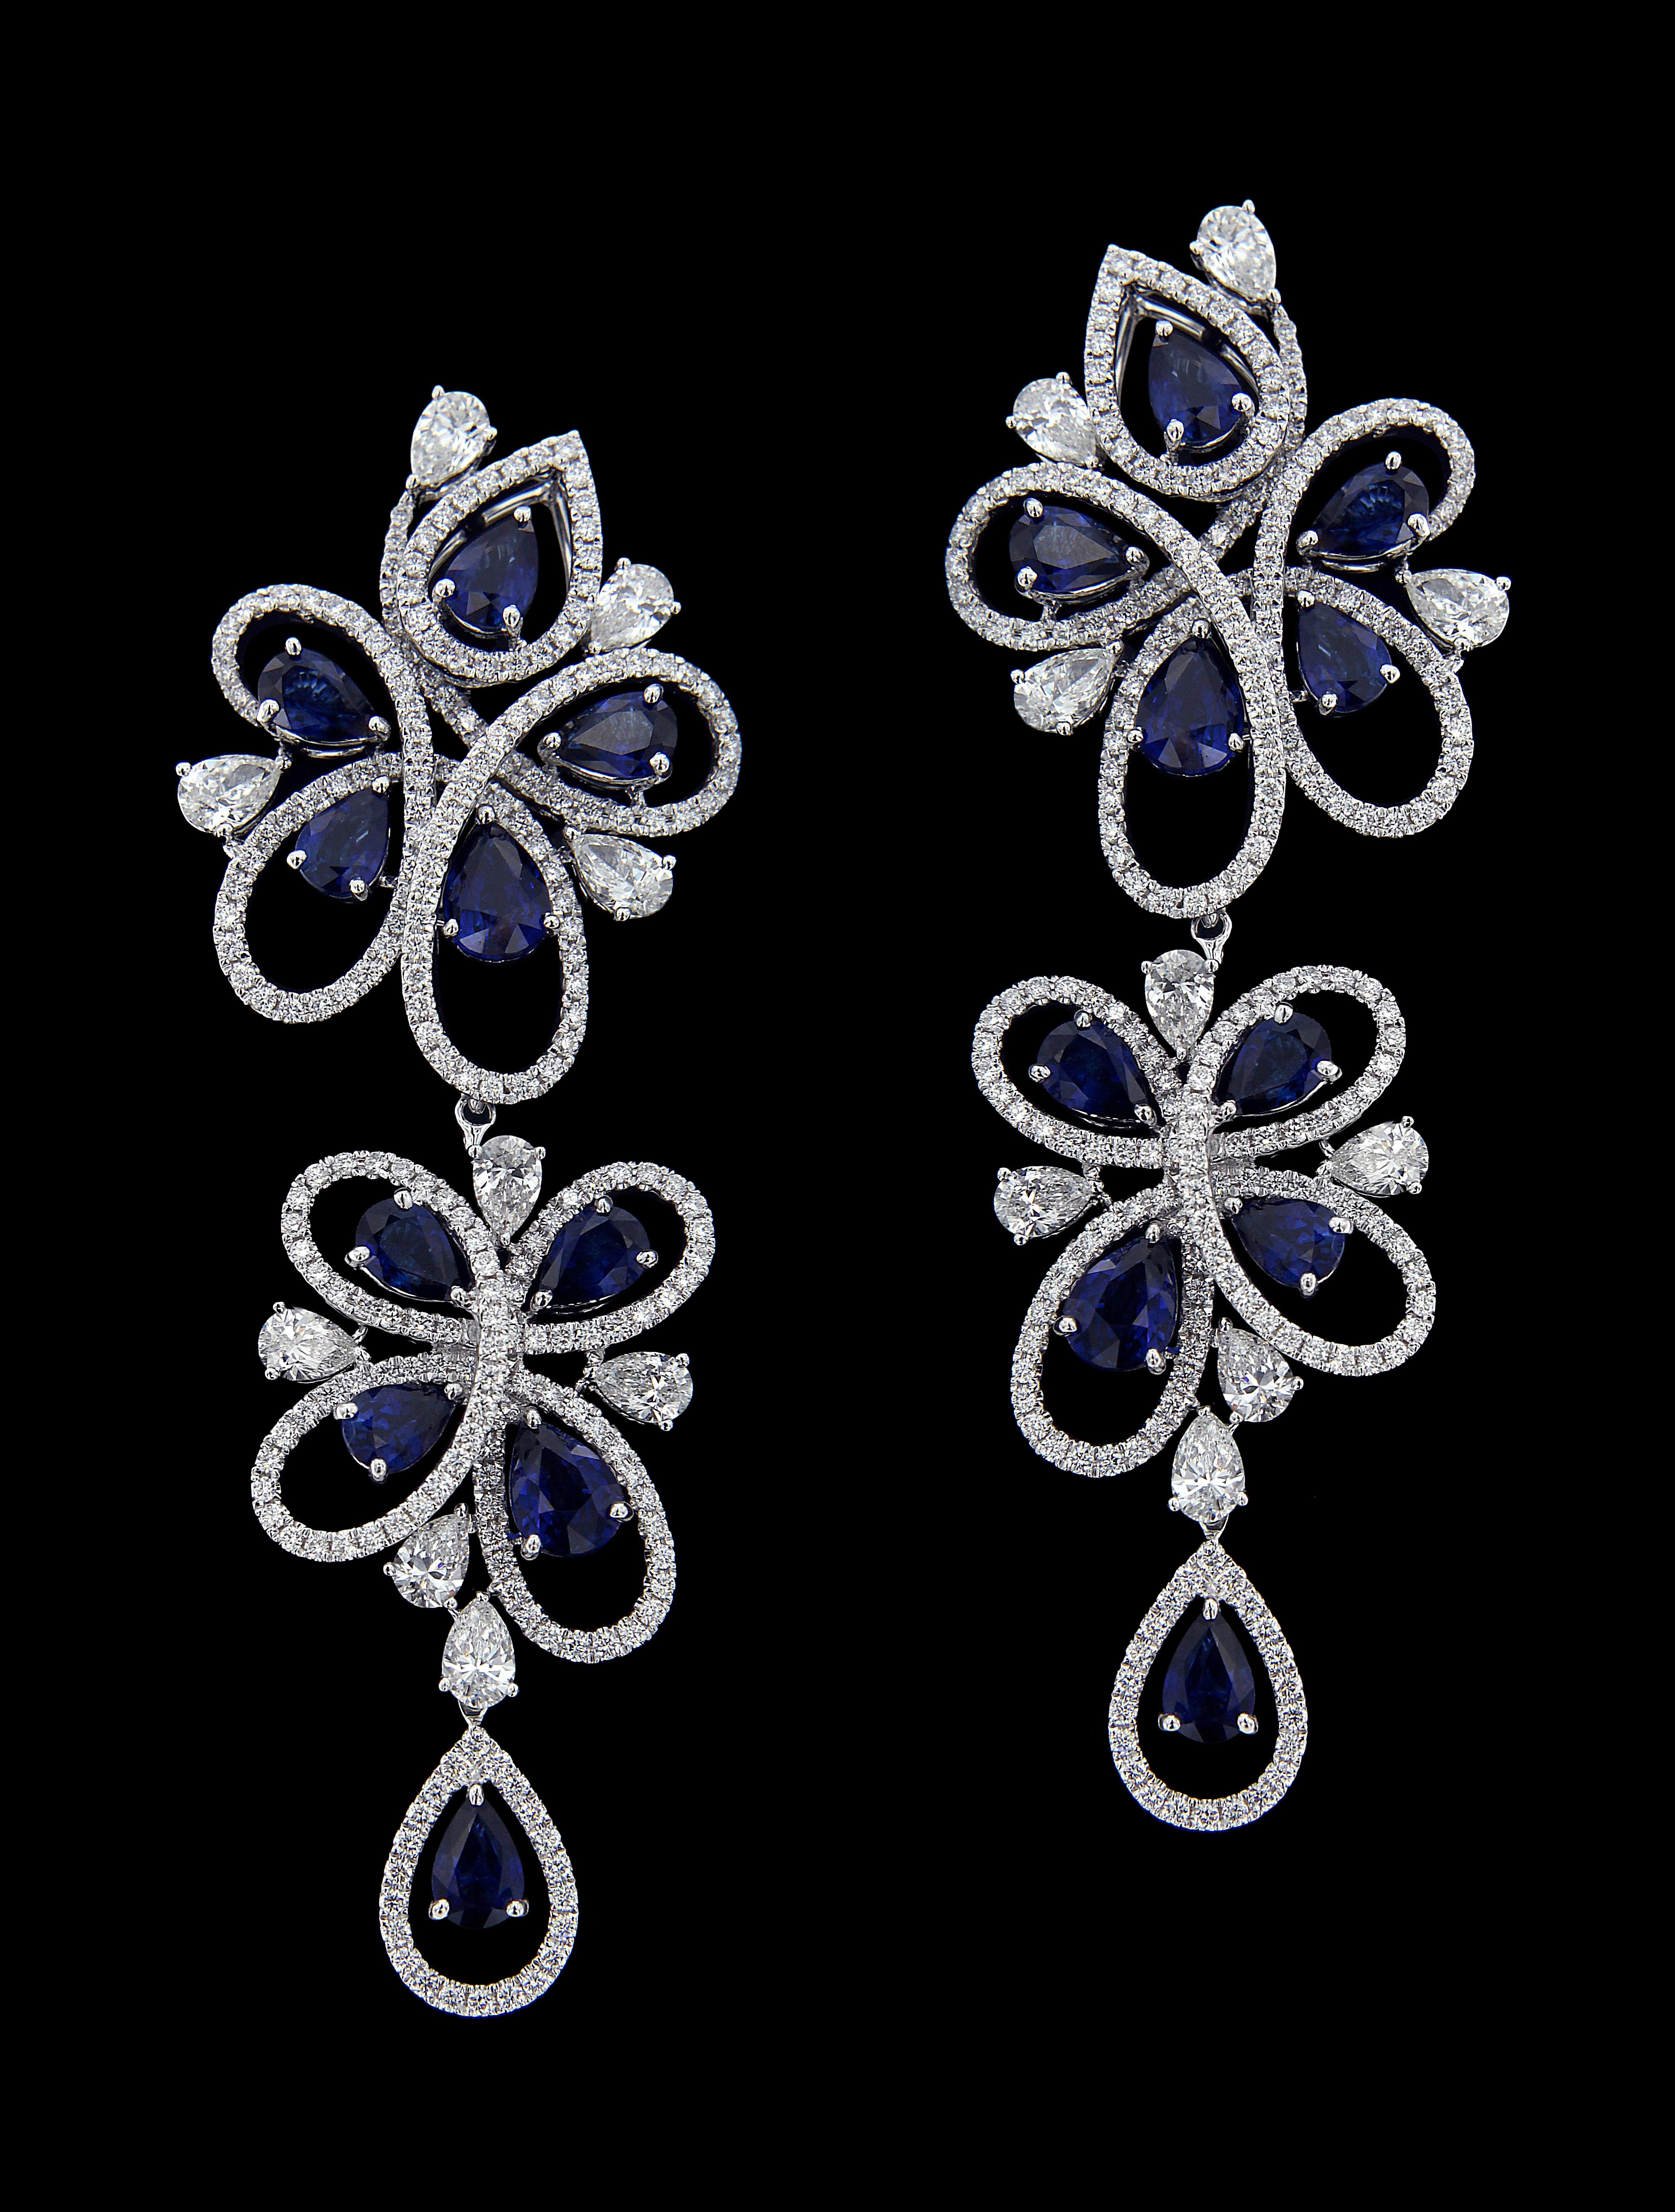 Pear Cut Charming 18 Karat White Gold, Diamond and Sapphire Earrings For Sale